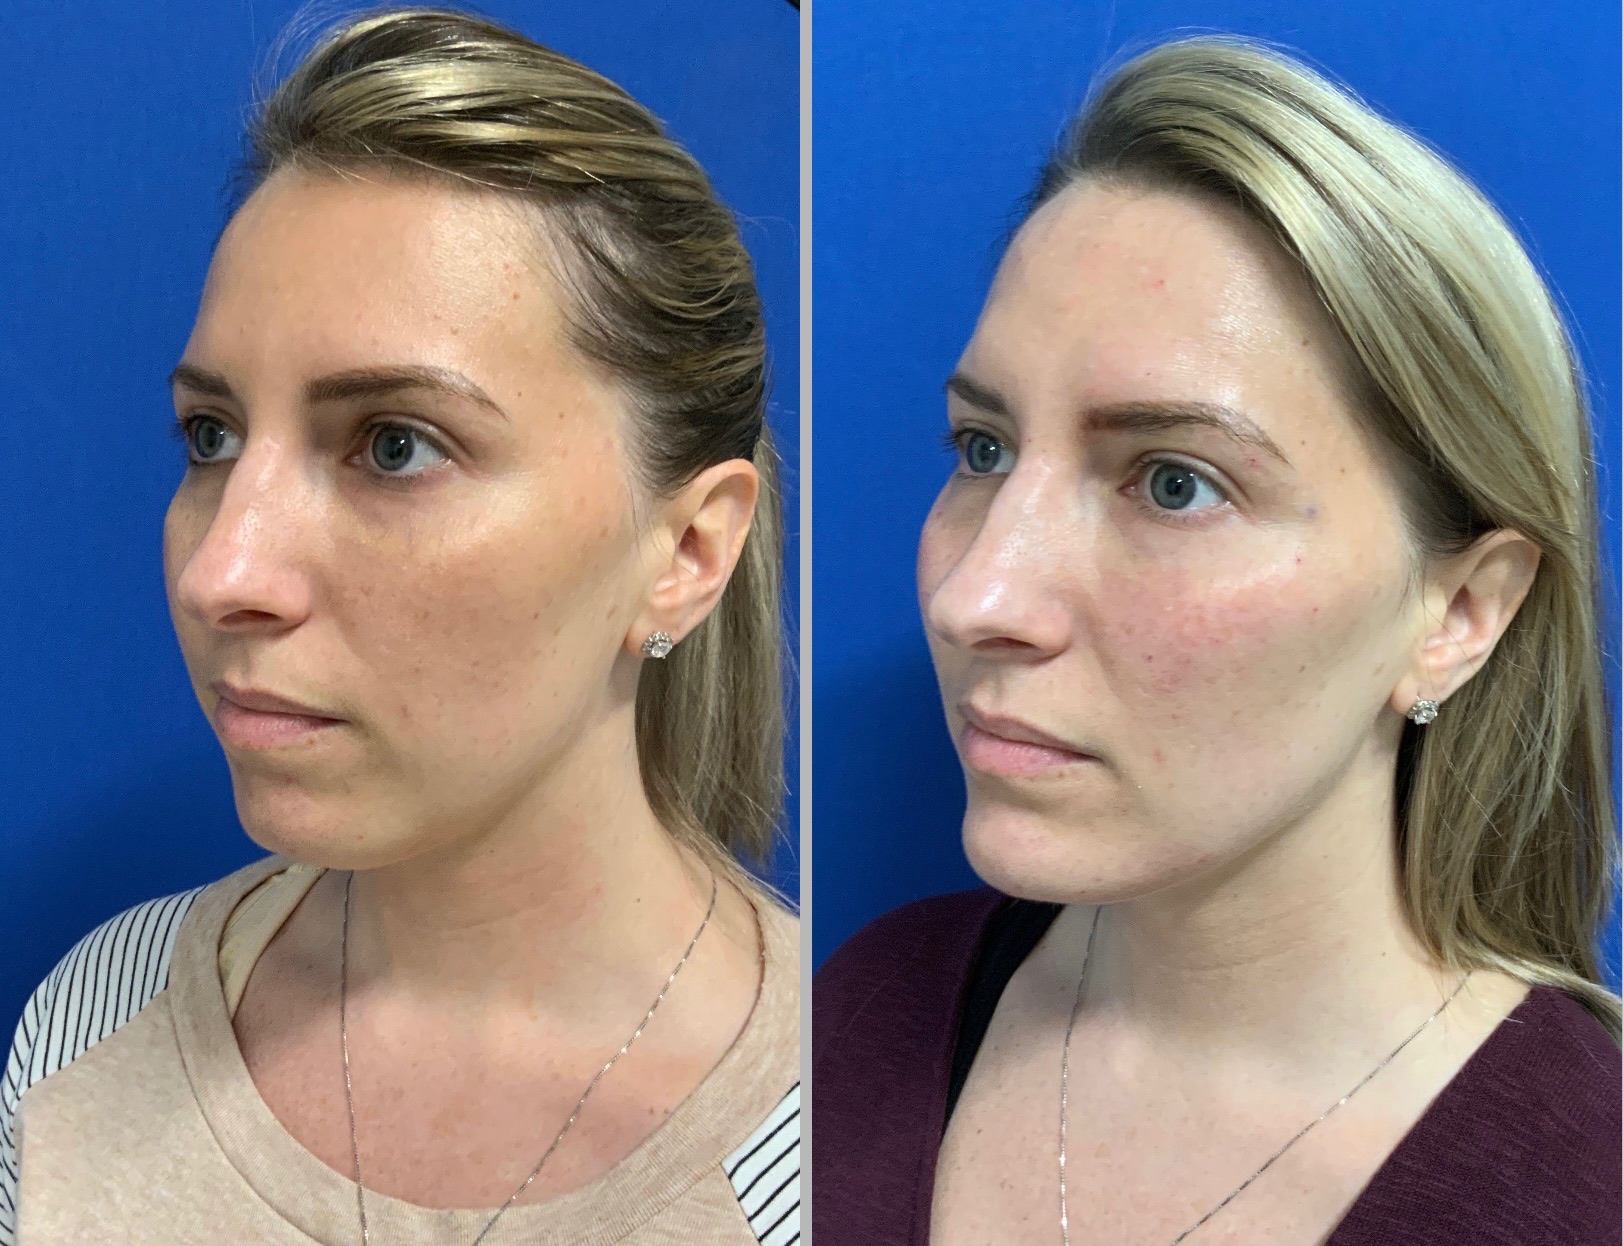 Jawline enhancement chin augmentation with filler